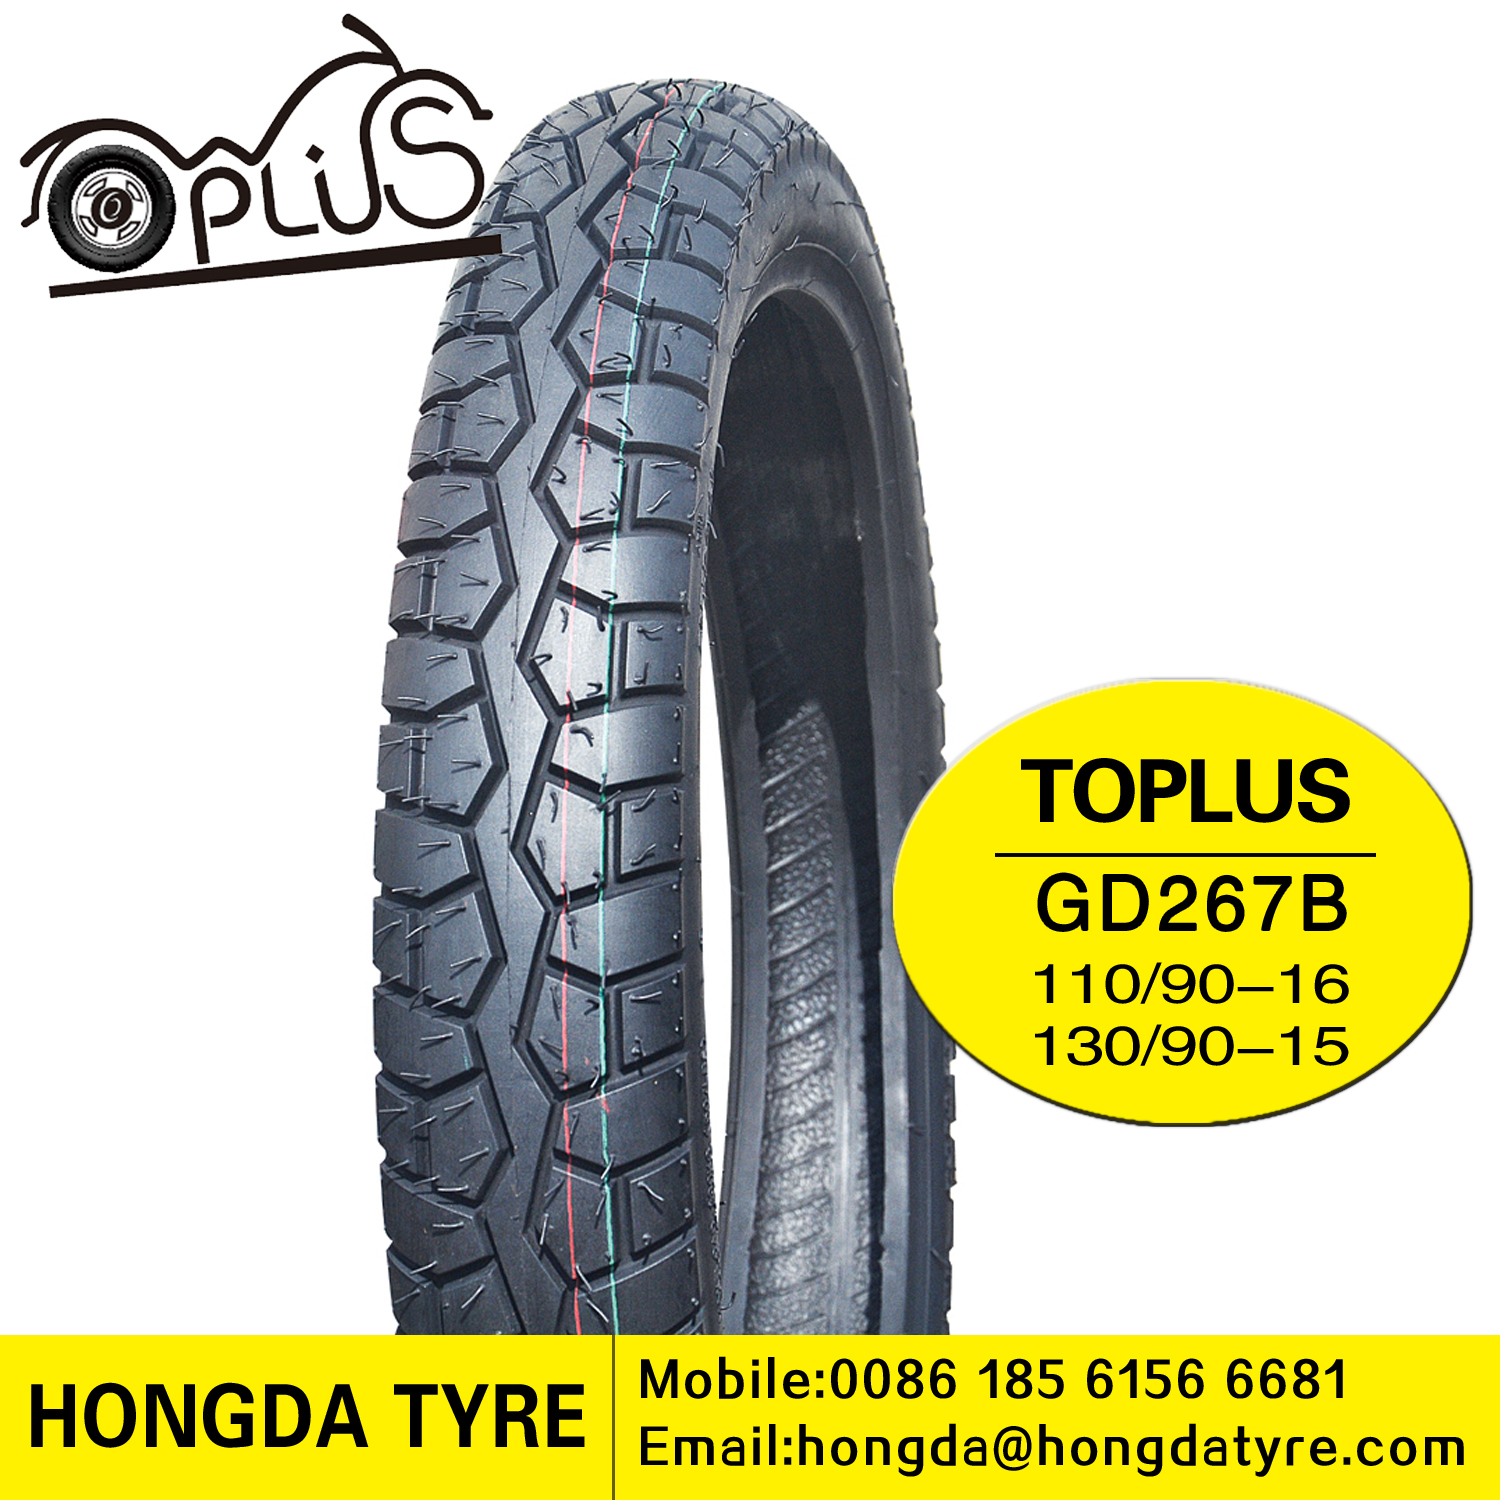 Motorcycle tyre GD267B